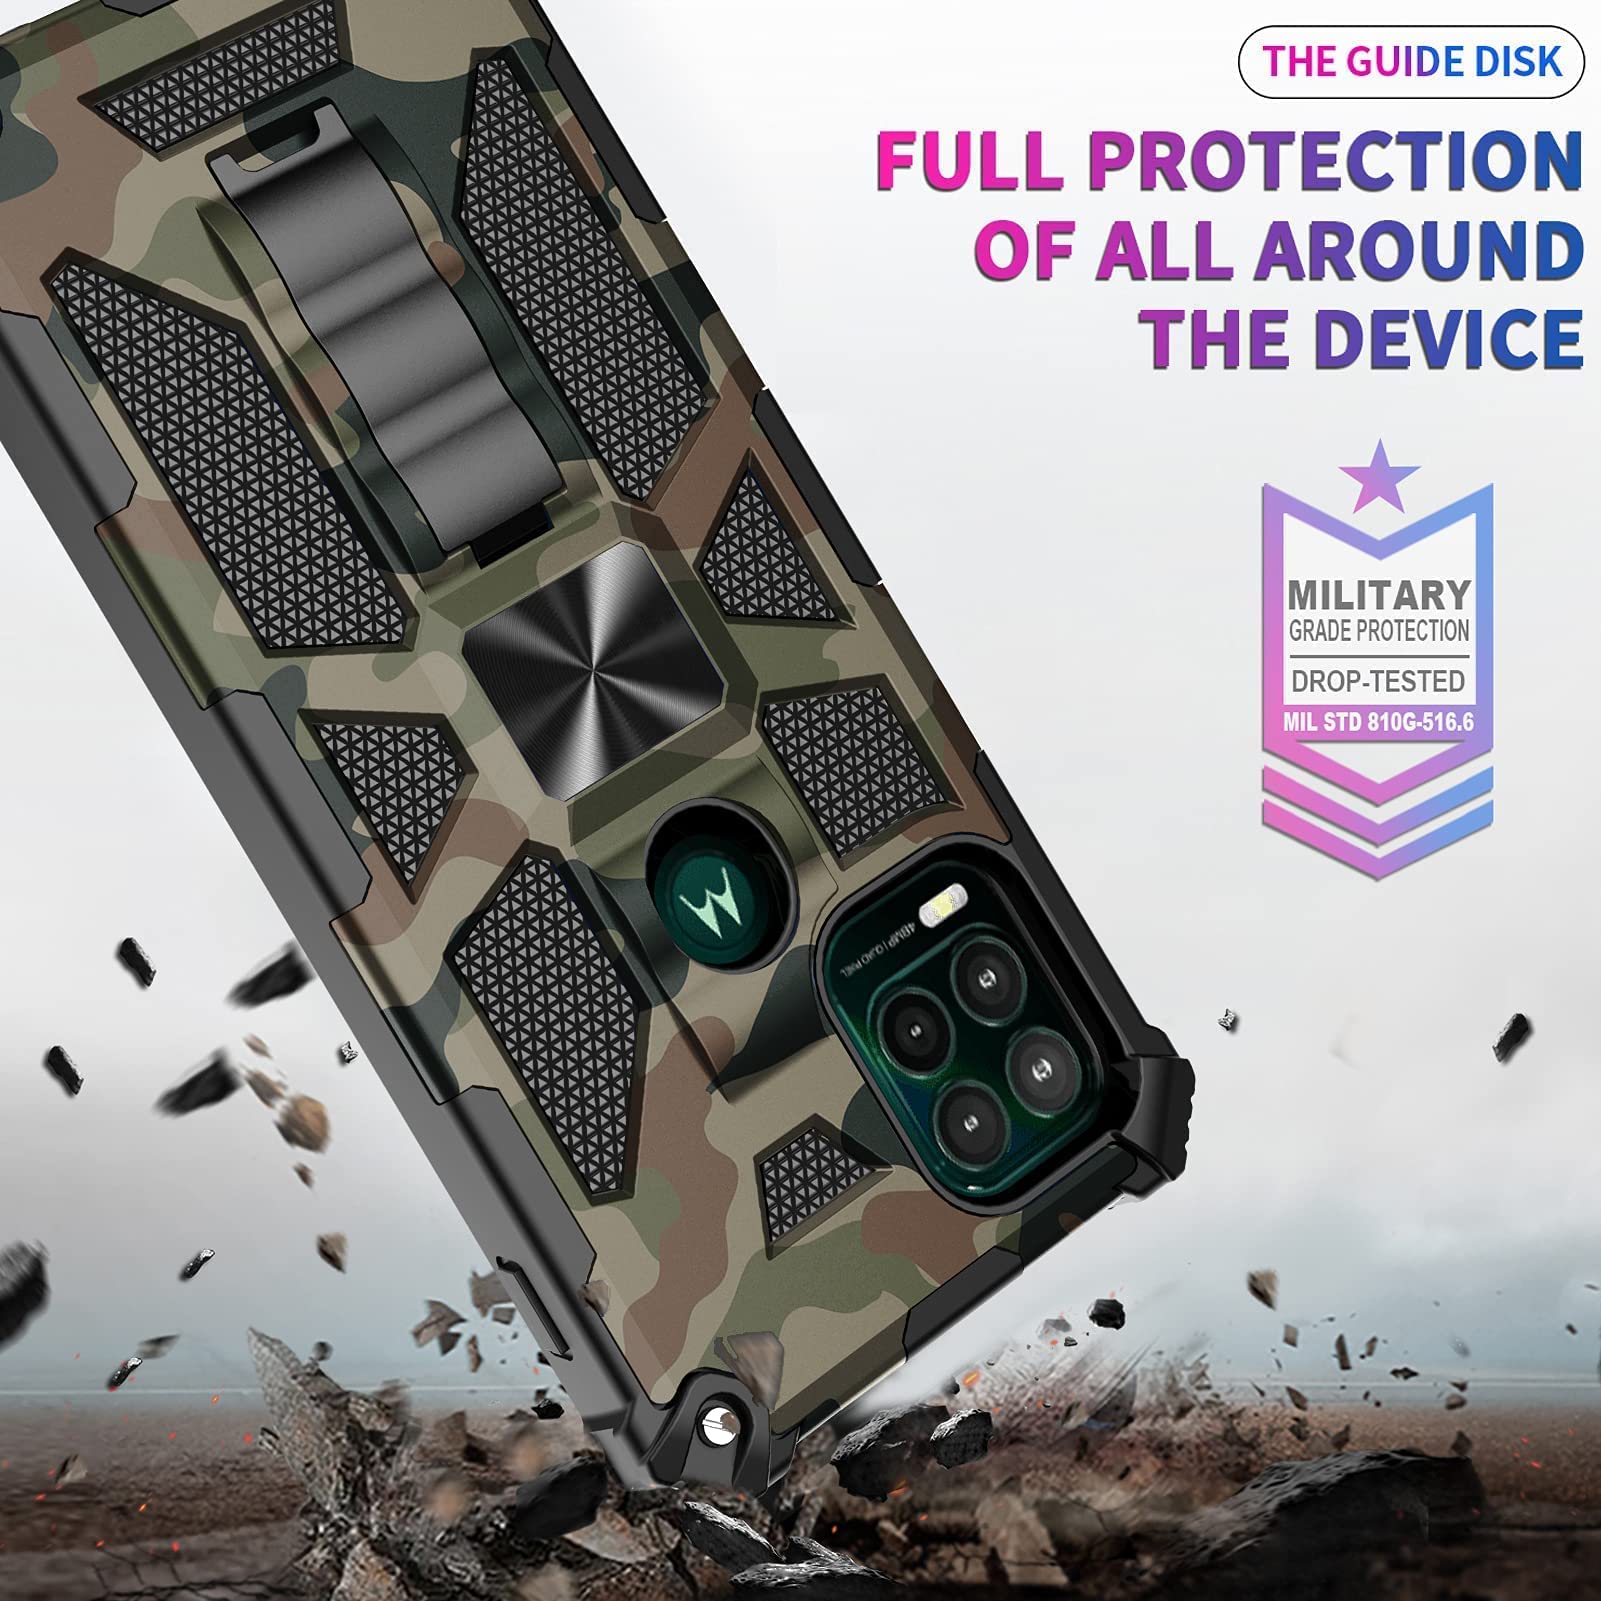 Shockproof Camouflage Military Grade Drop Tested Phone Case with Built in Kickstand with Screen Protector Holster Belt Clip Fits for Moto G Stylus 5G 6.8